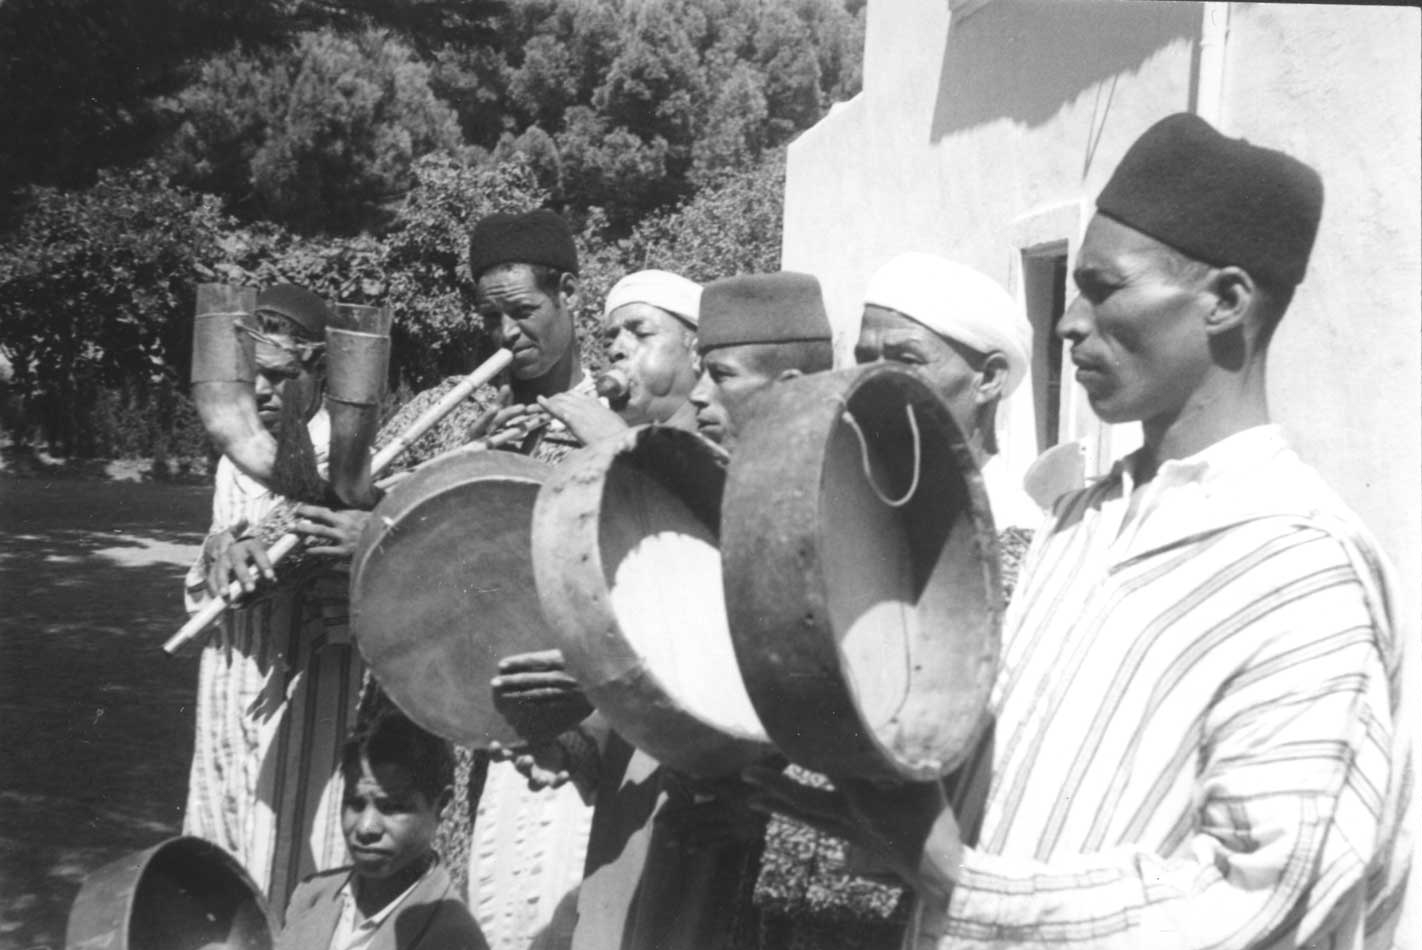 Musicians of the Beni Bouifrour play in Seganan, Morocco